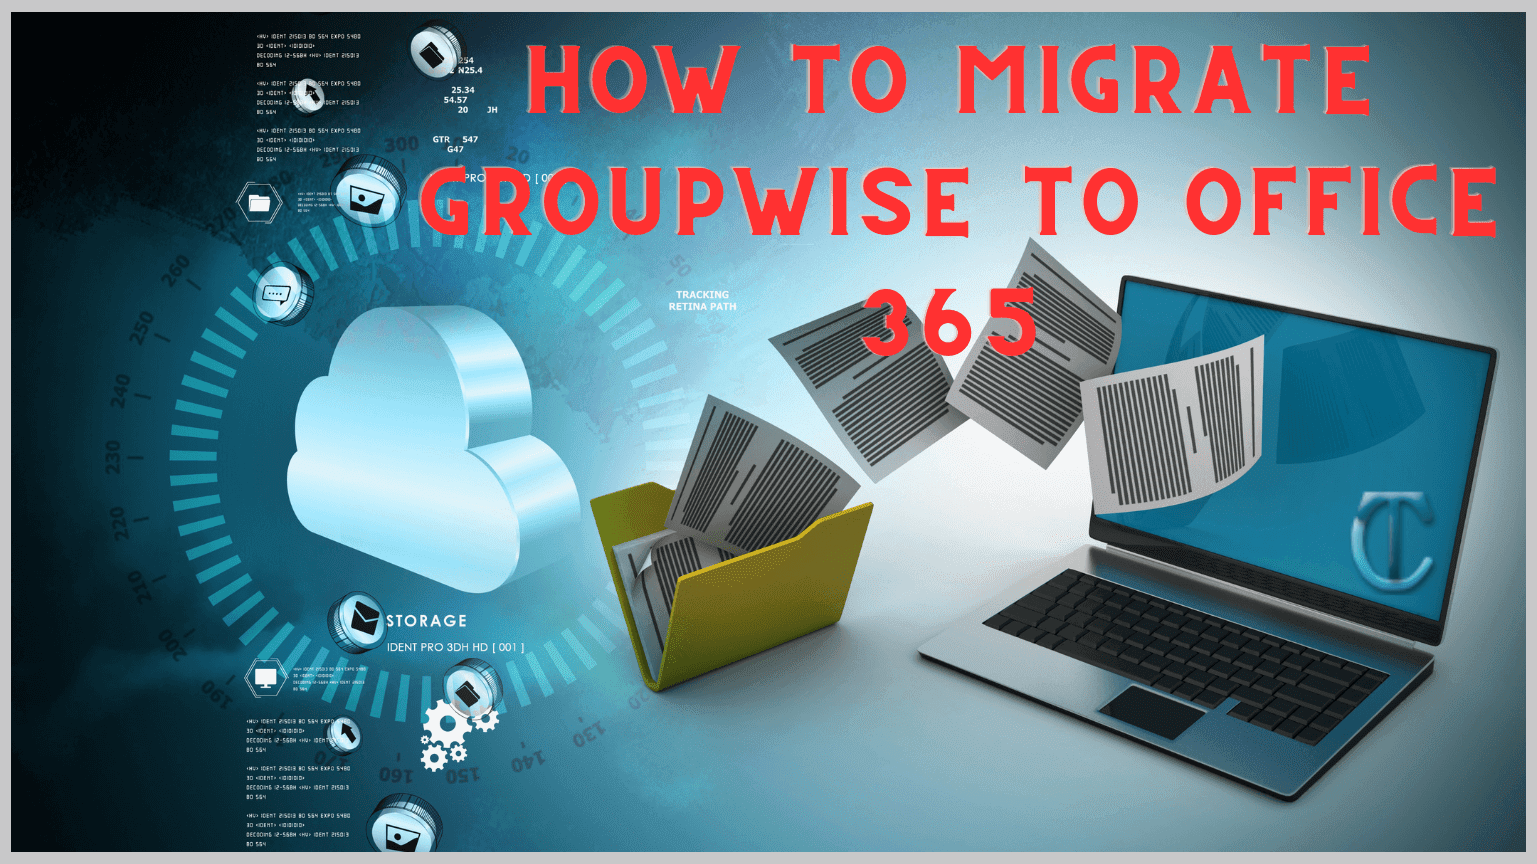 How to migrate GroupWise to Office 365